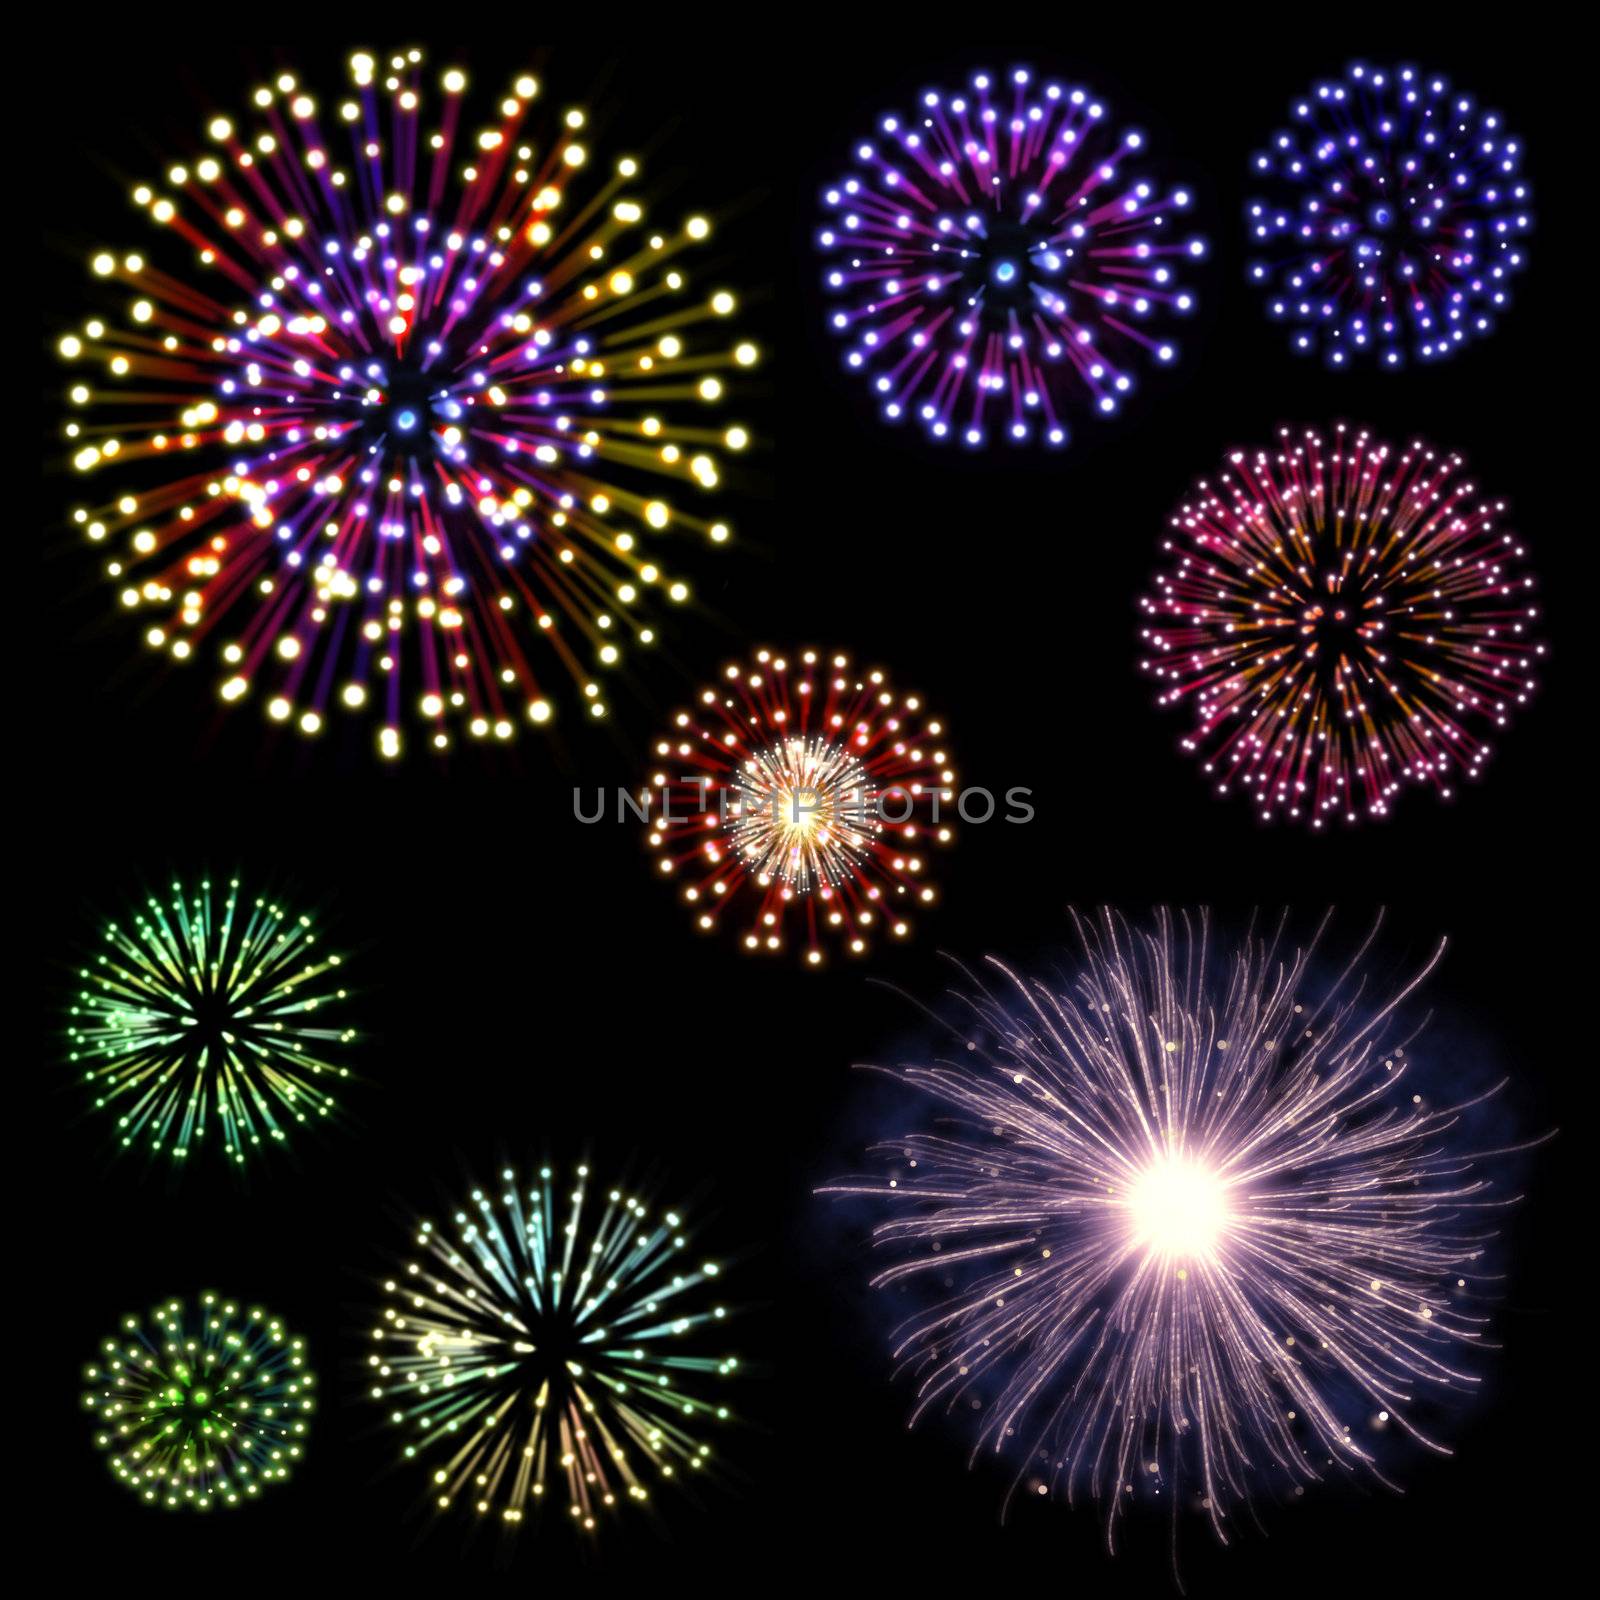 Collection of colorful fireworks, sparklers, salute and petards explosions. Design elements isolated over black background